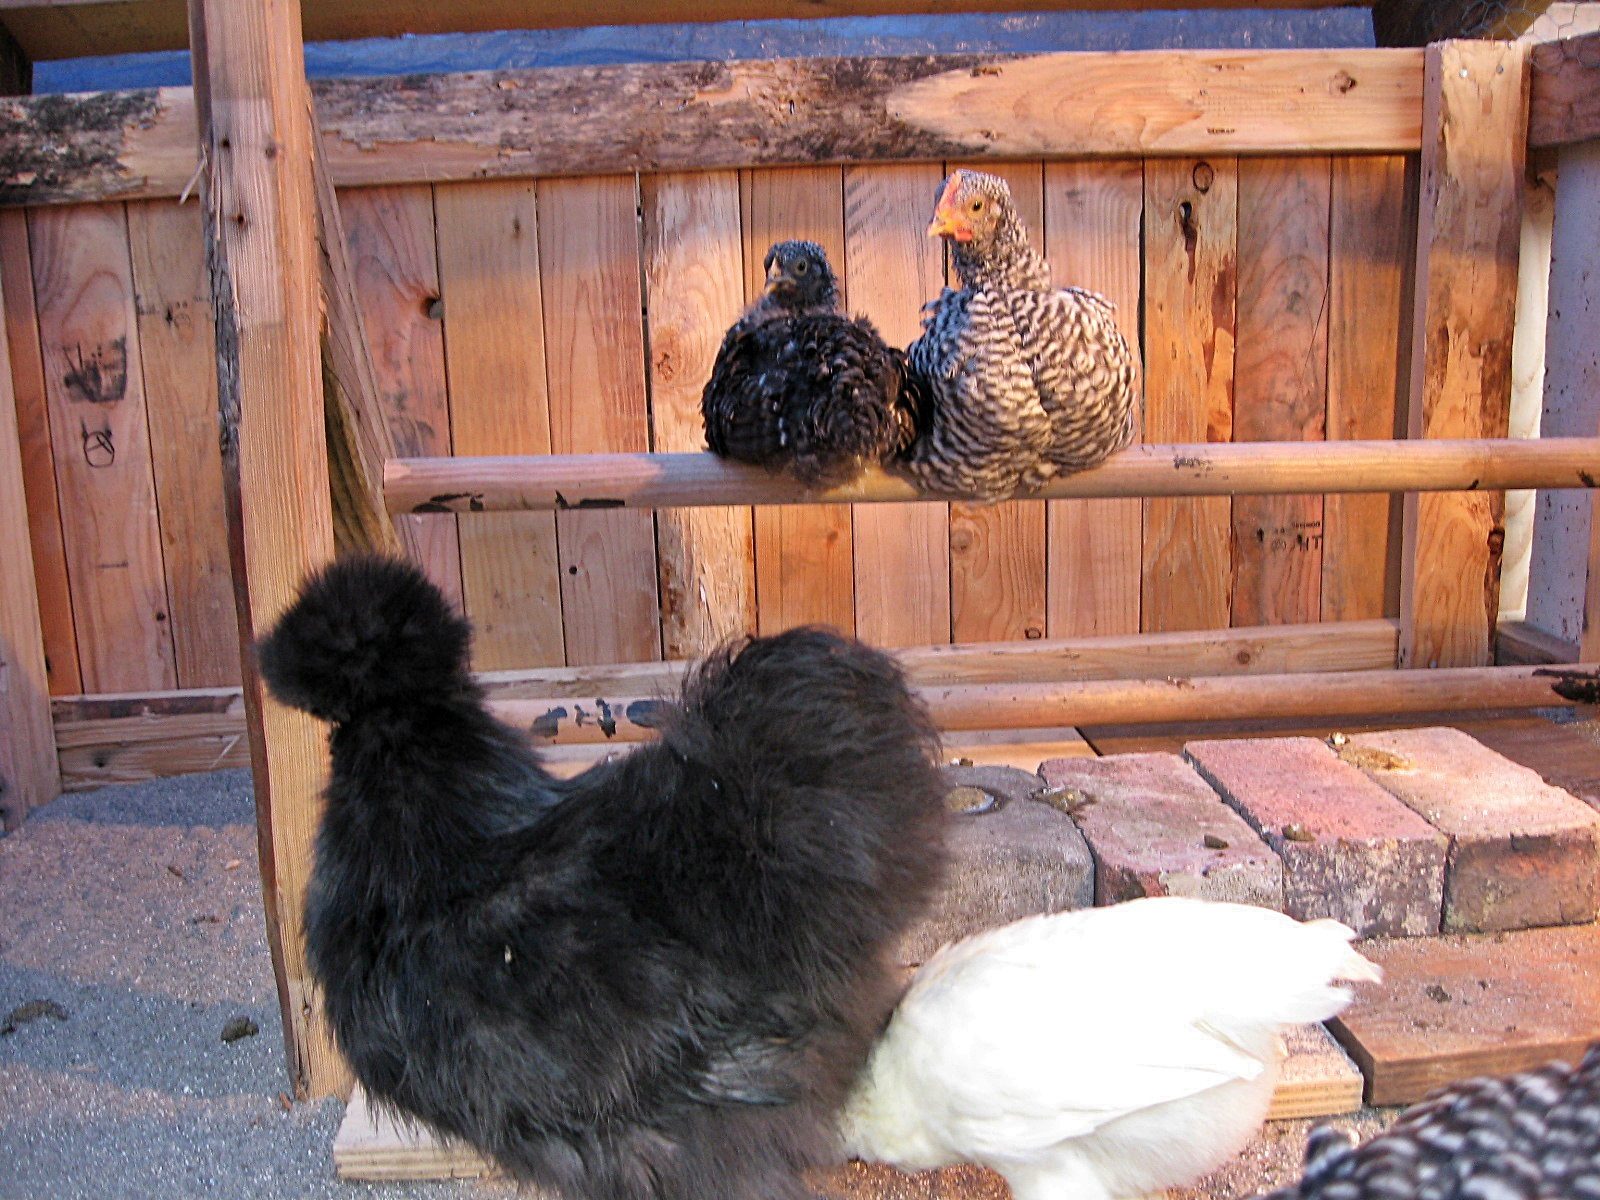 Good morning! We loved our first night in the new coop!